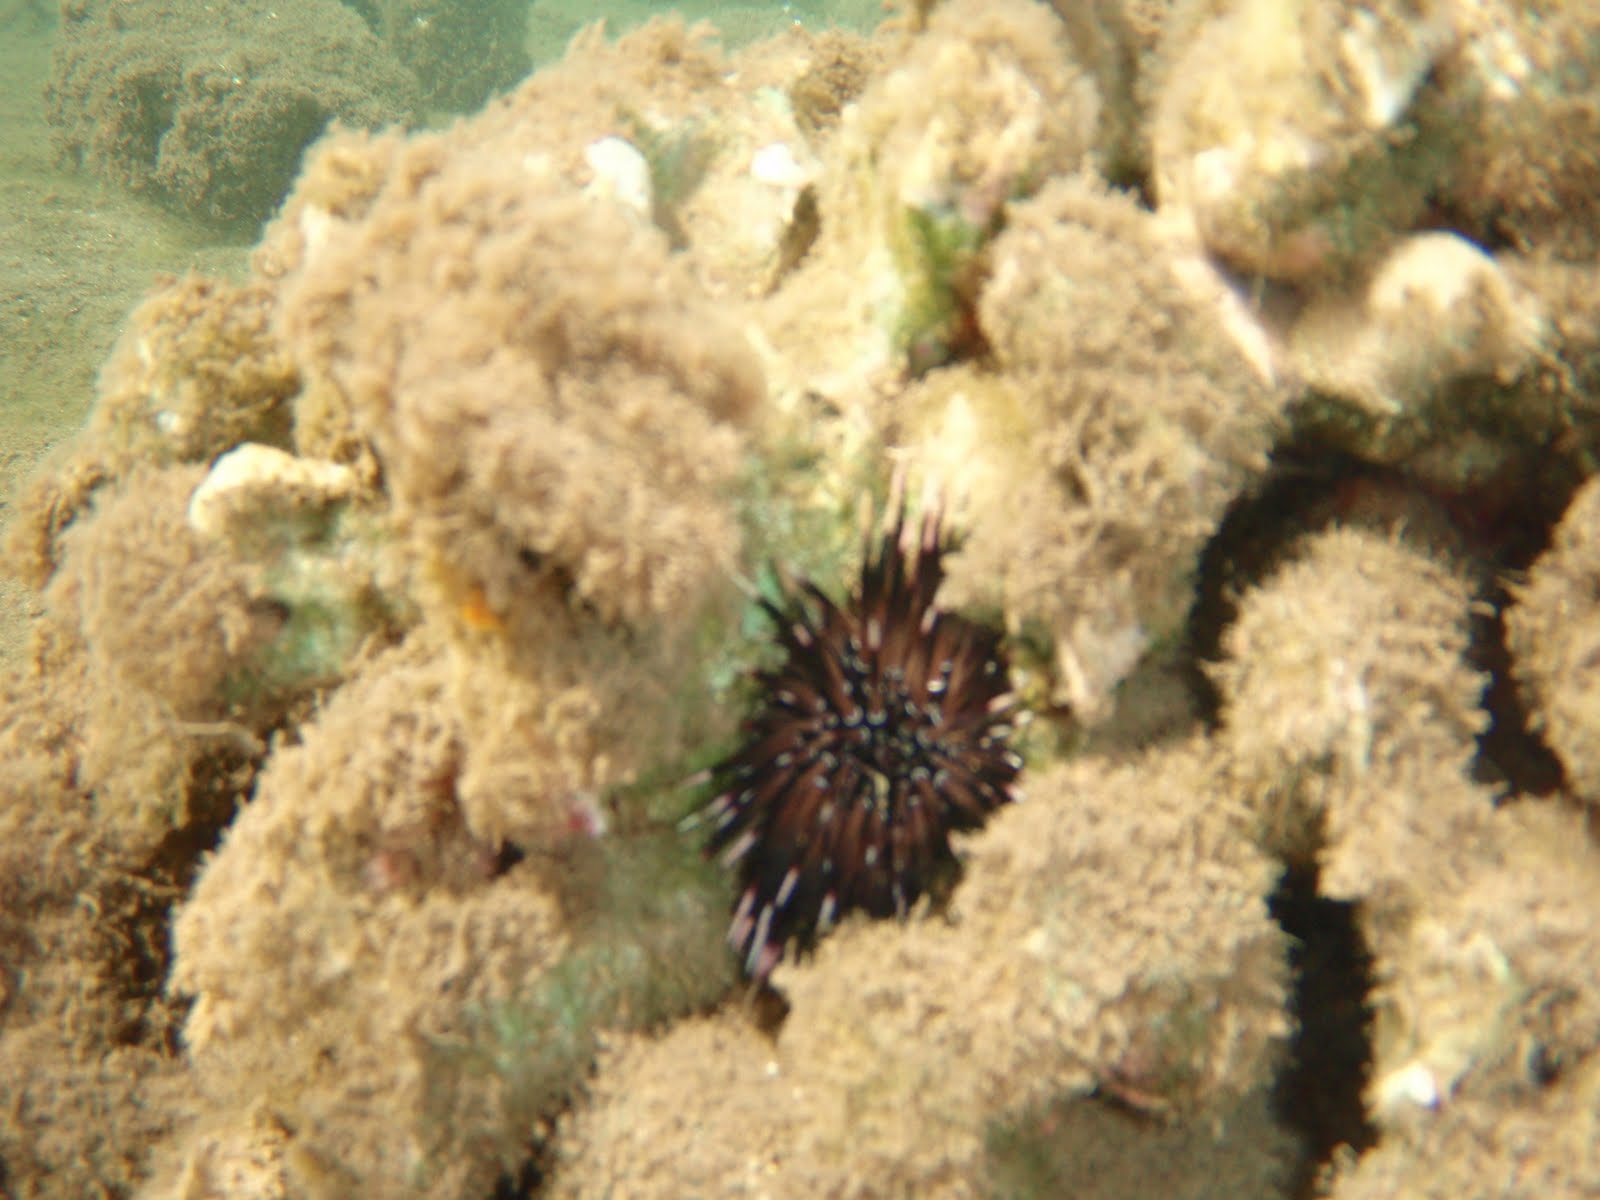 Blurry picture of dark urchin nestled in coral crevices